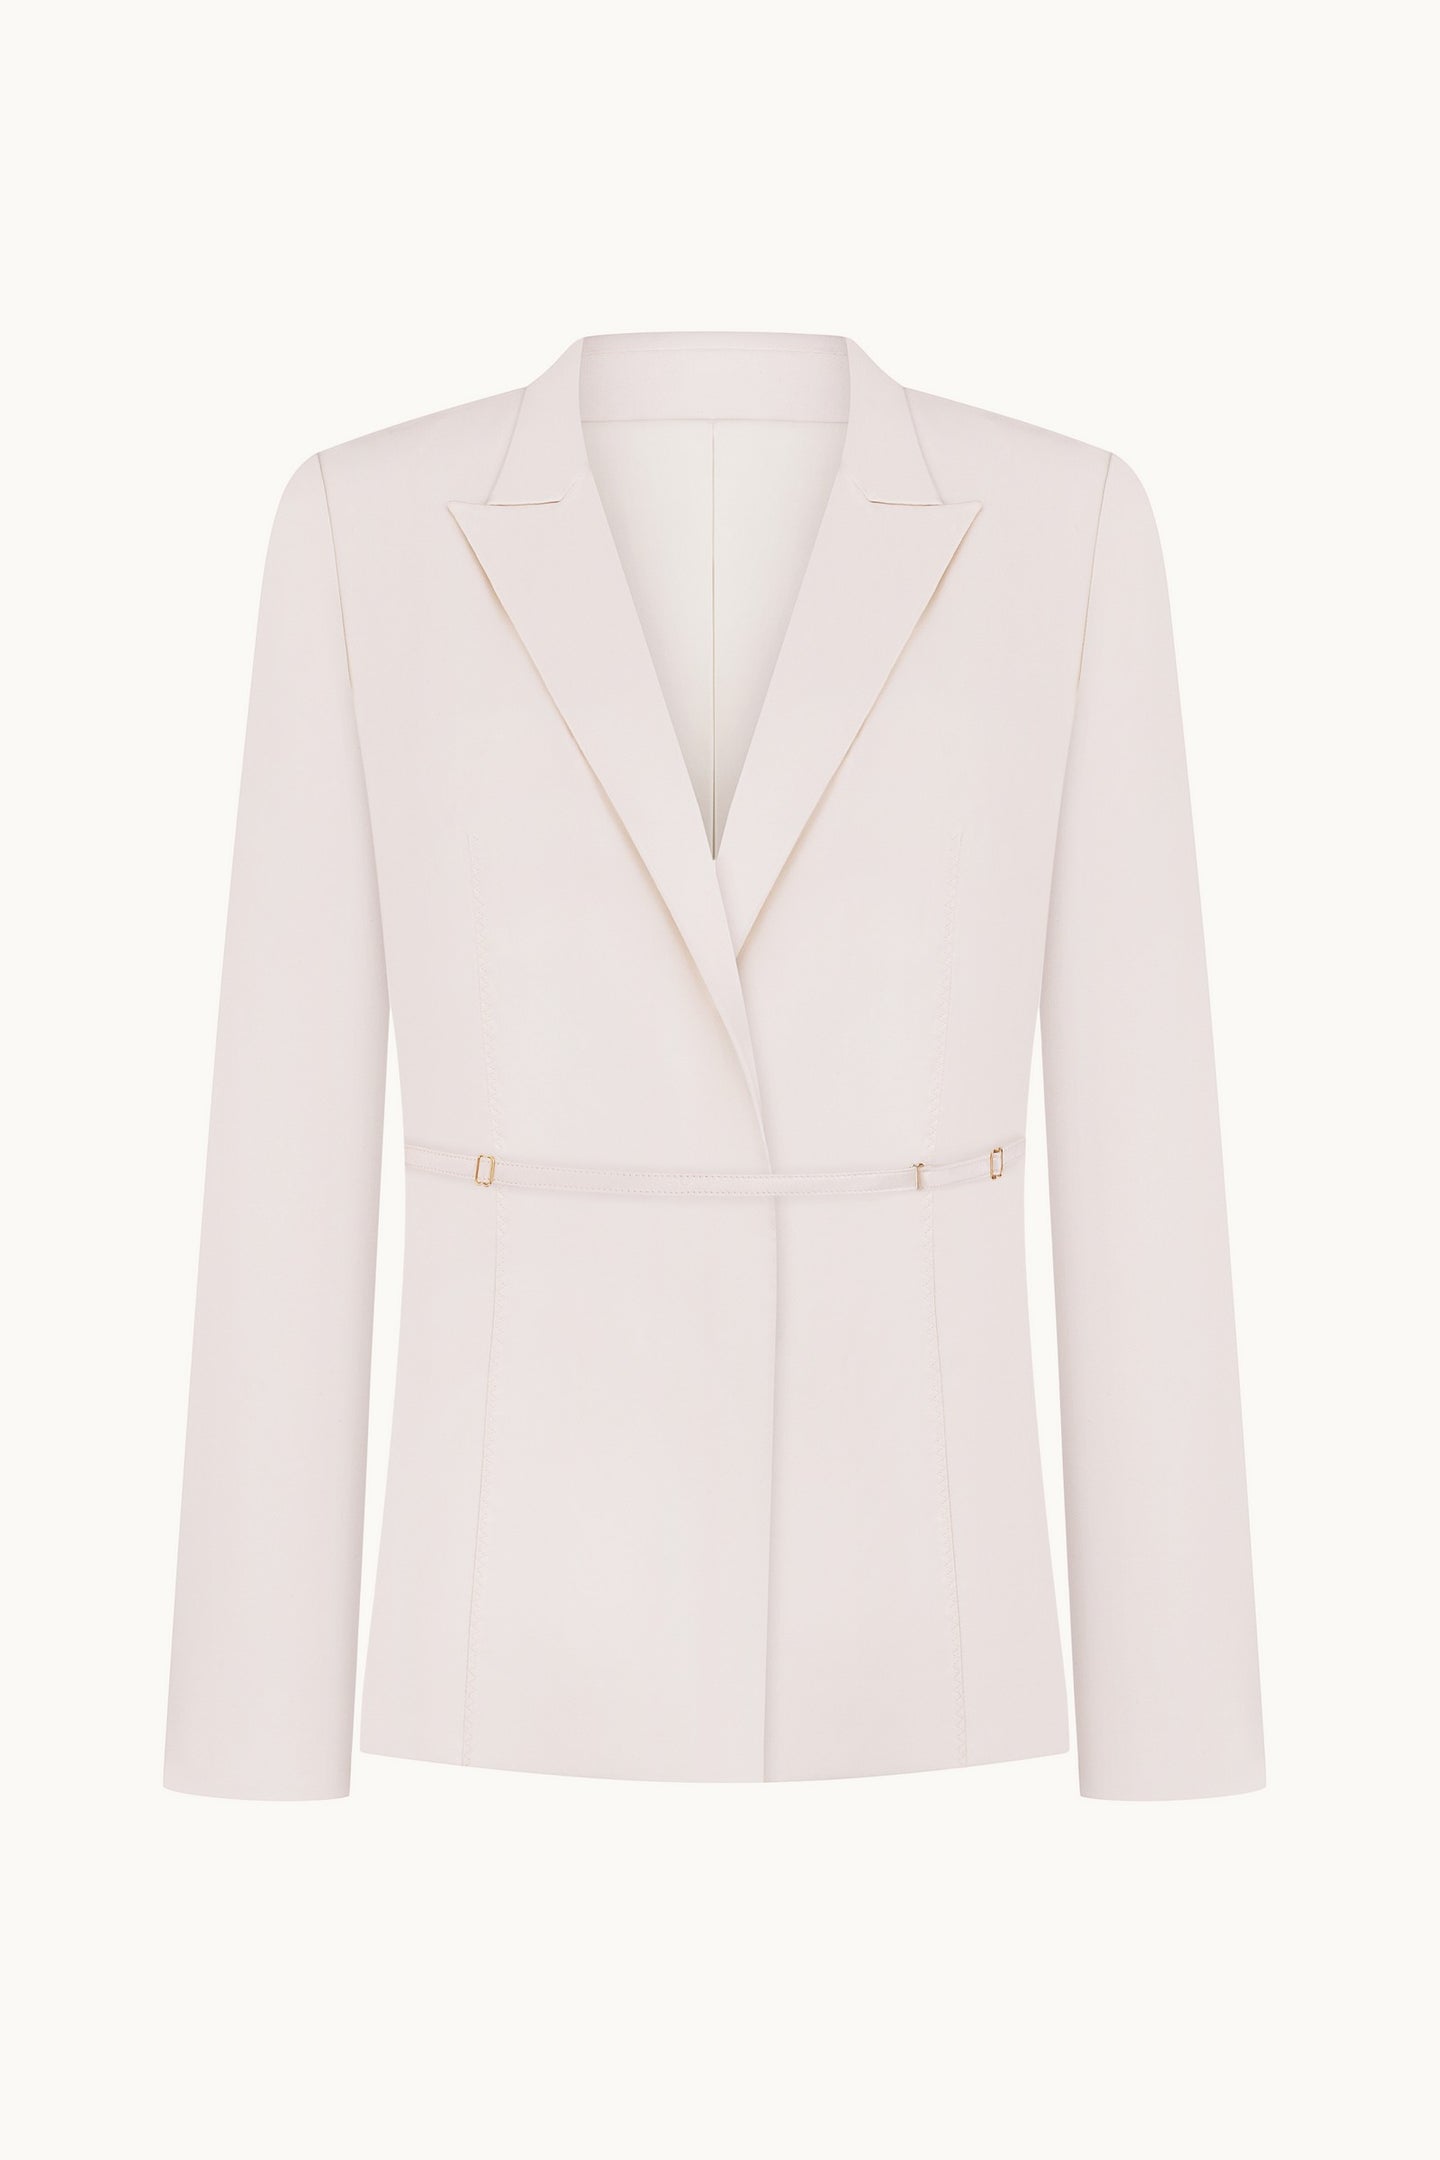 Talisa ivory jacket front view